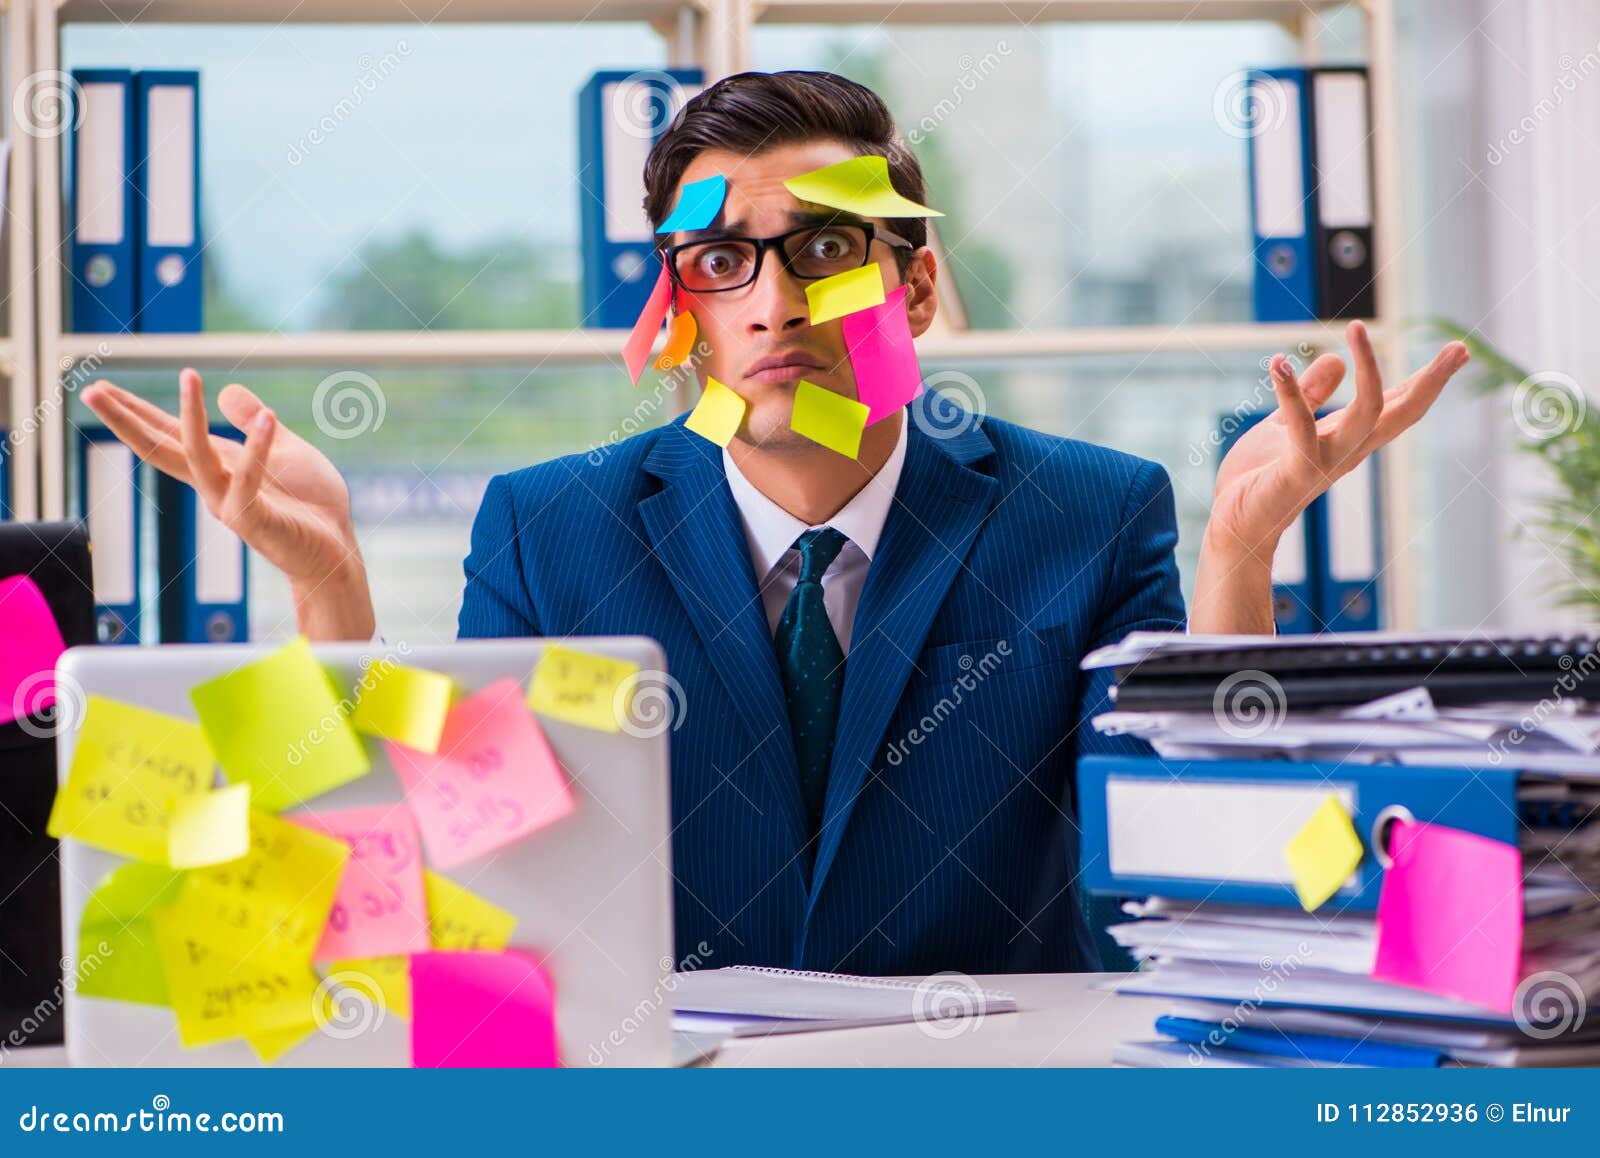 the businessman with reminder notes in multitasking concept